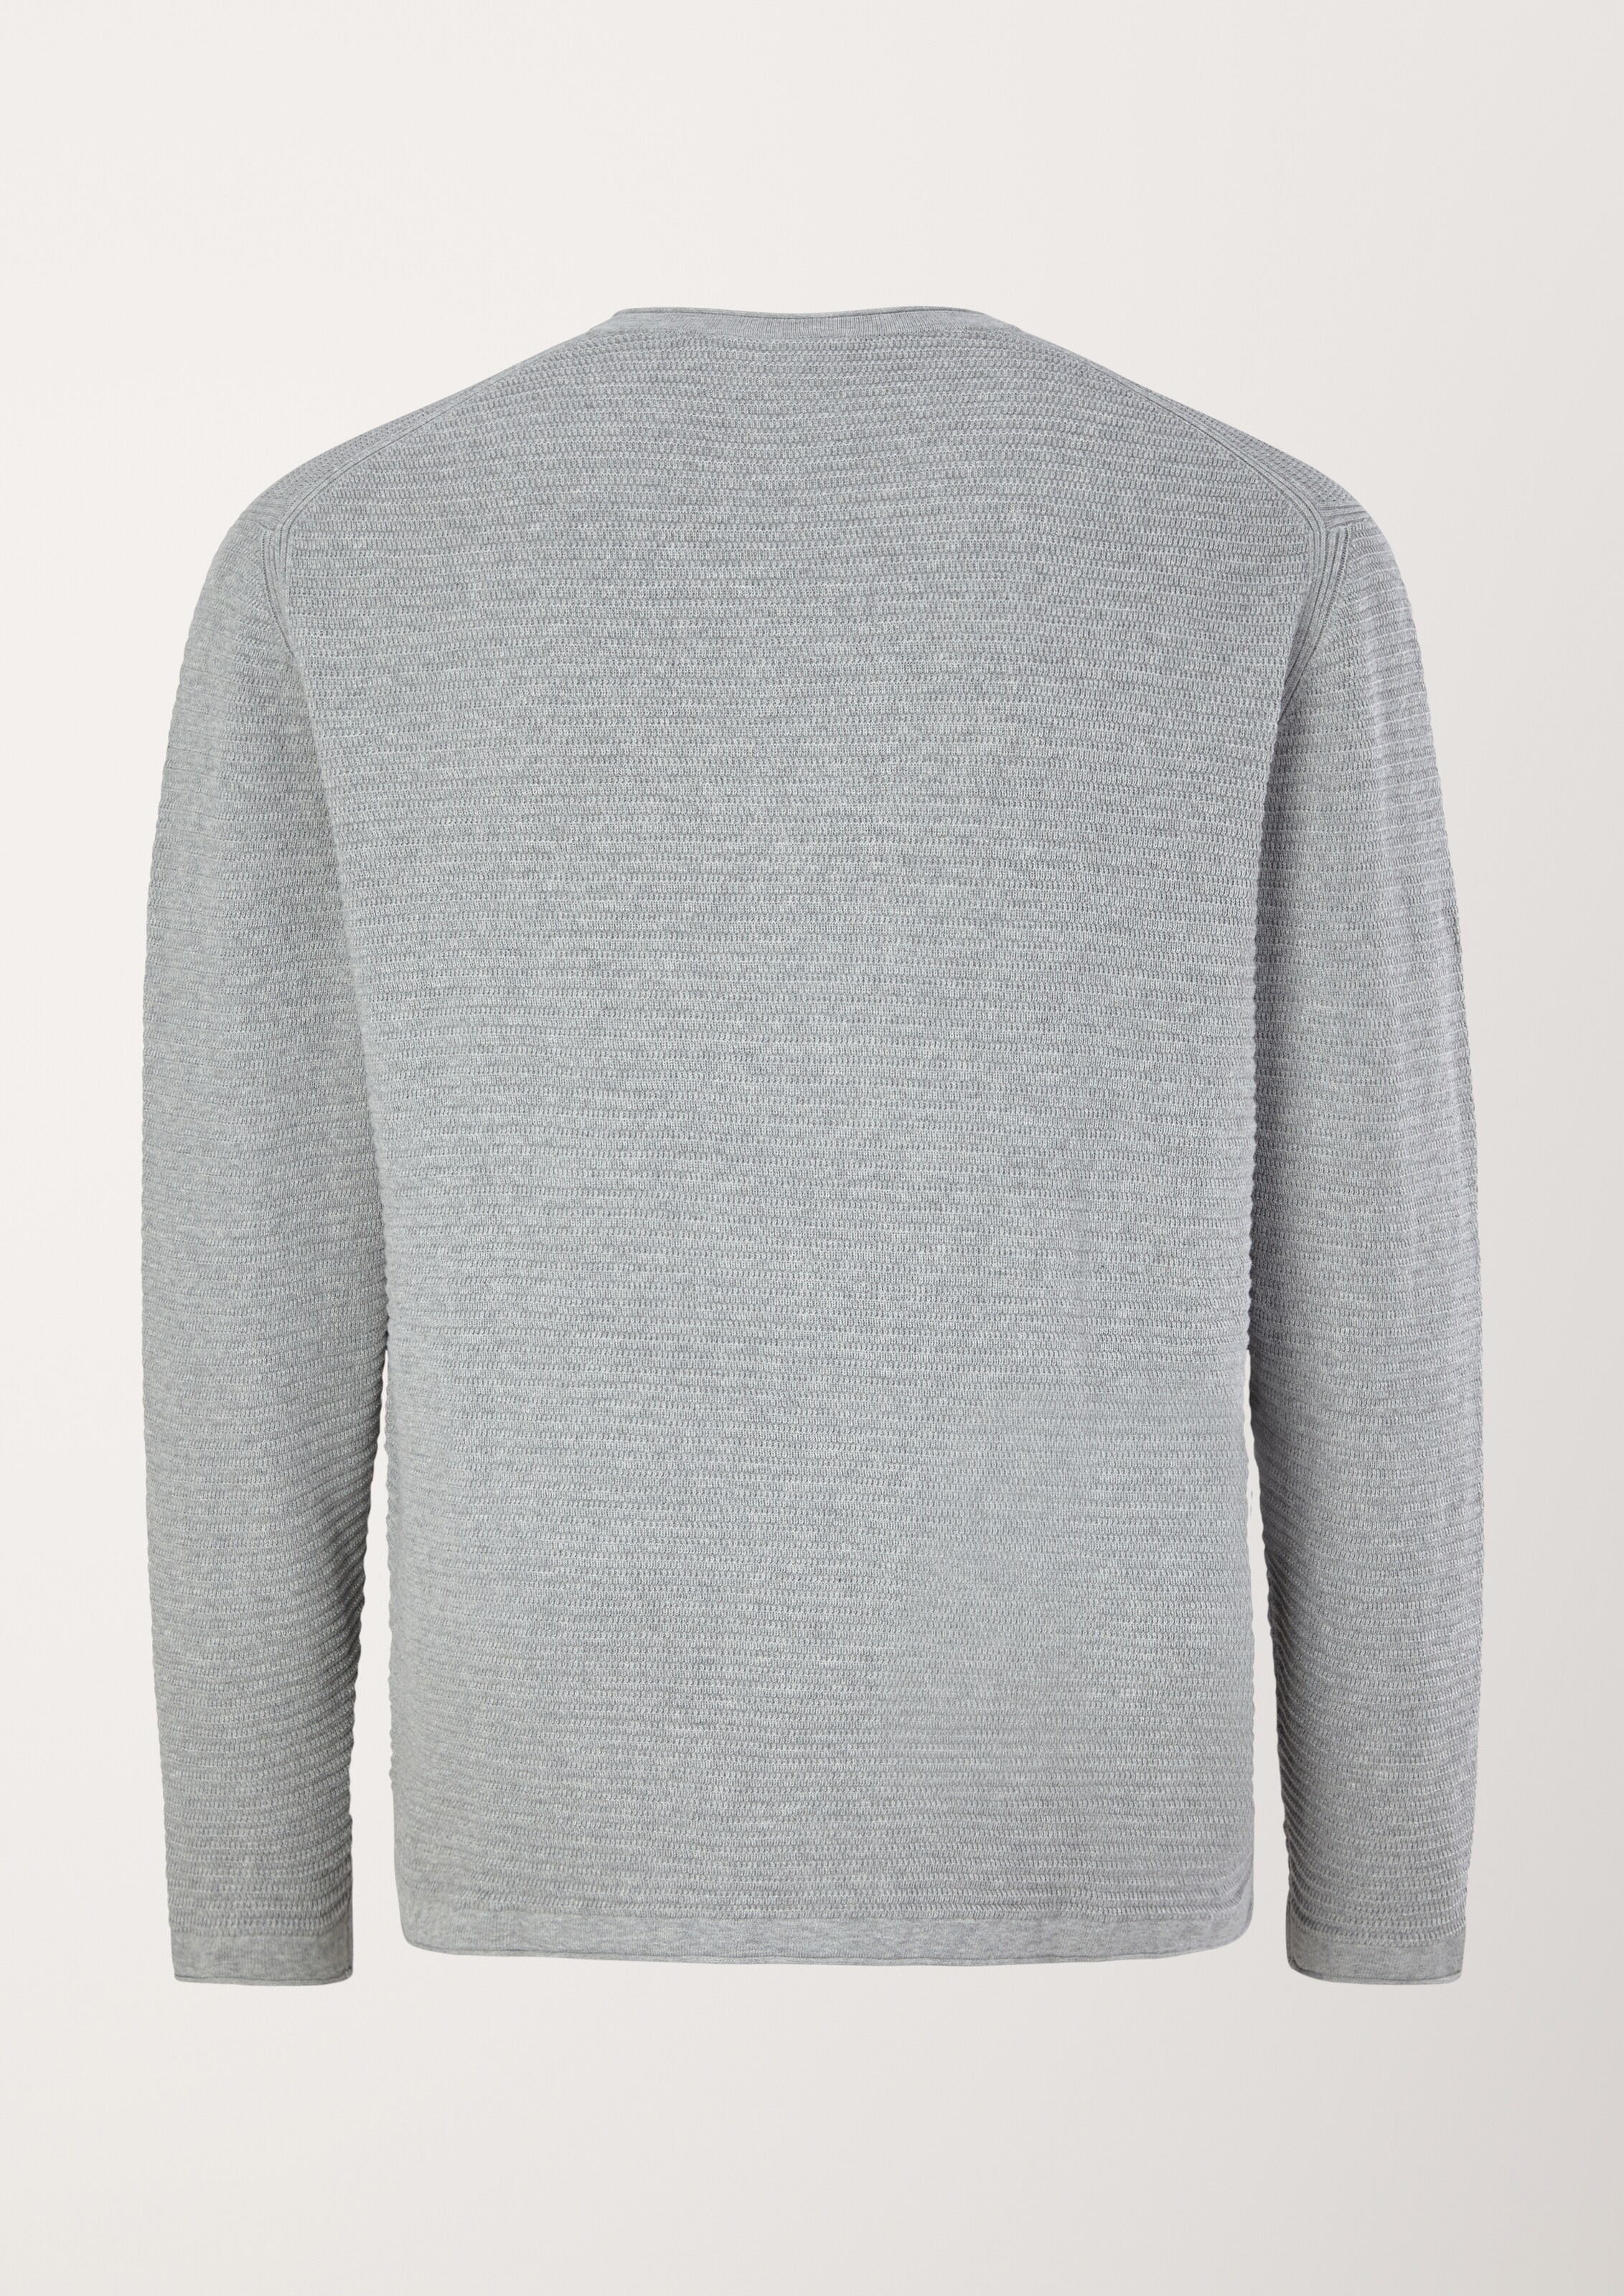 Promos Pull-over s.Oliver Red Label Big & Tall en Gris Chiné 